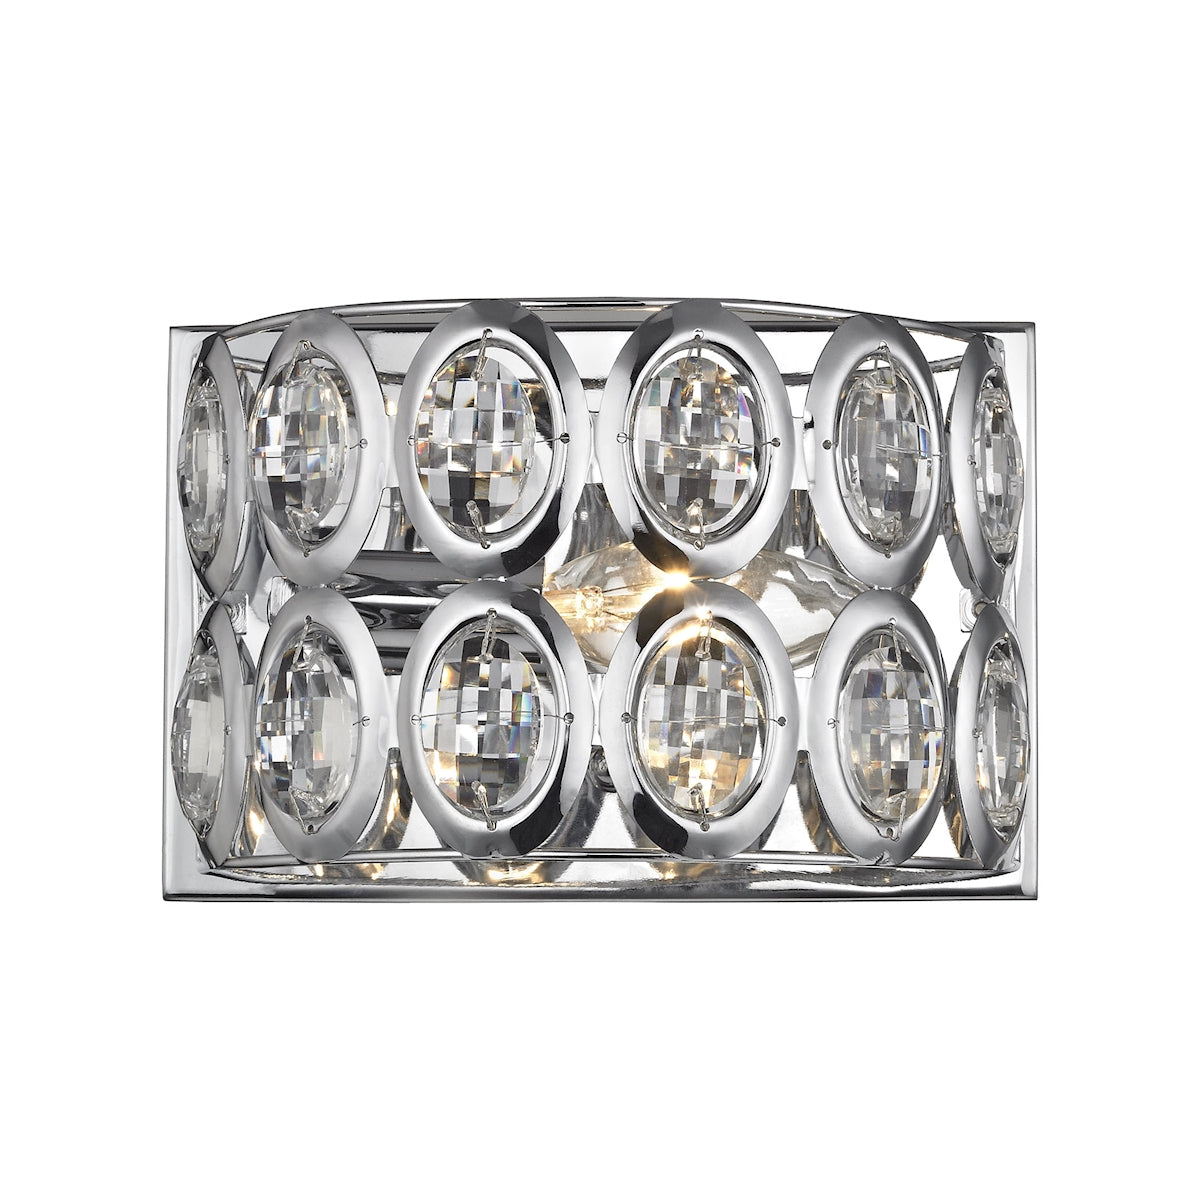 ELK Lighting 81150/1 Tessa 1-Light Vanity Sconce in Polished Chrome with Clear Crystal